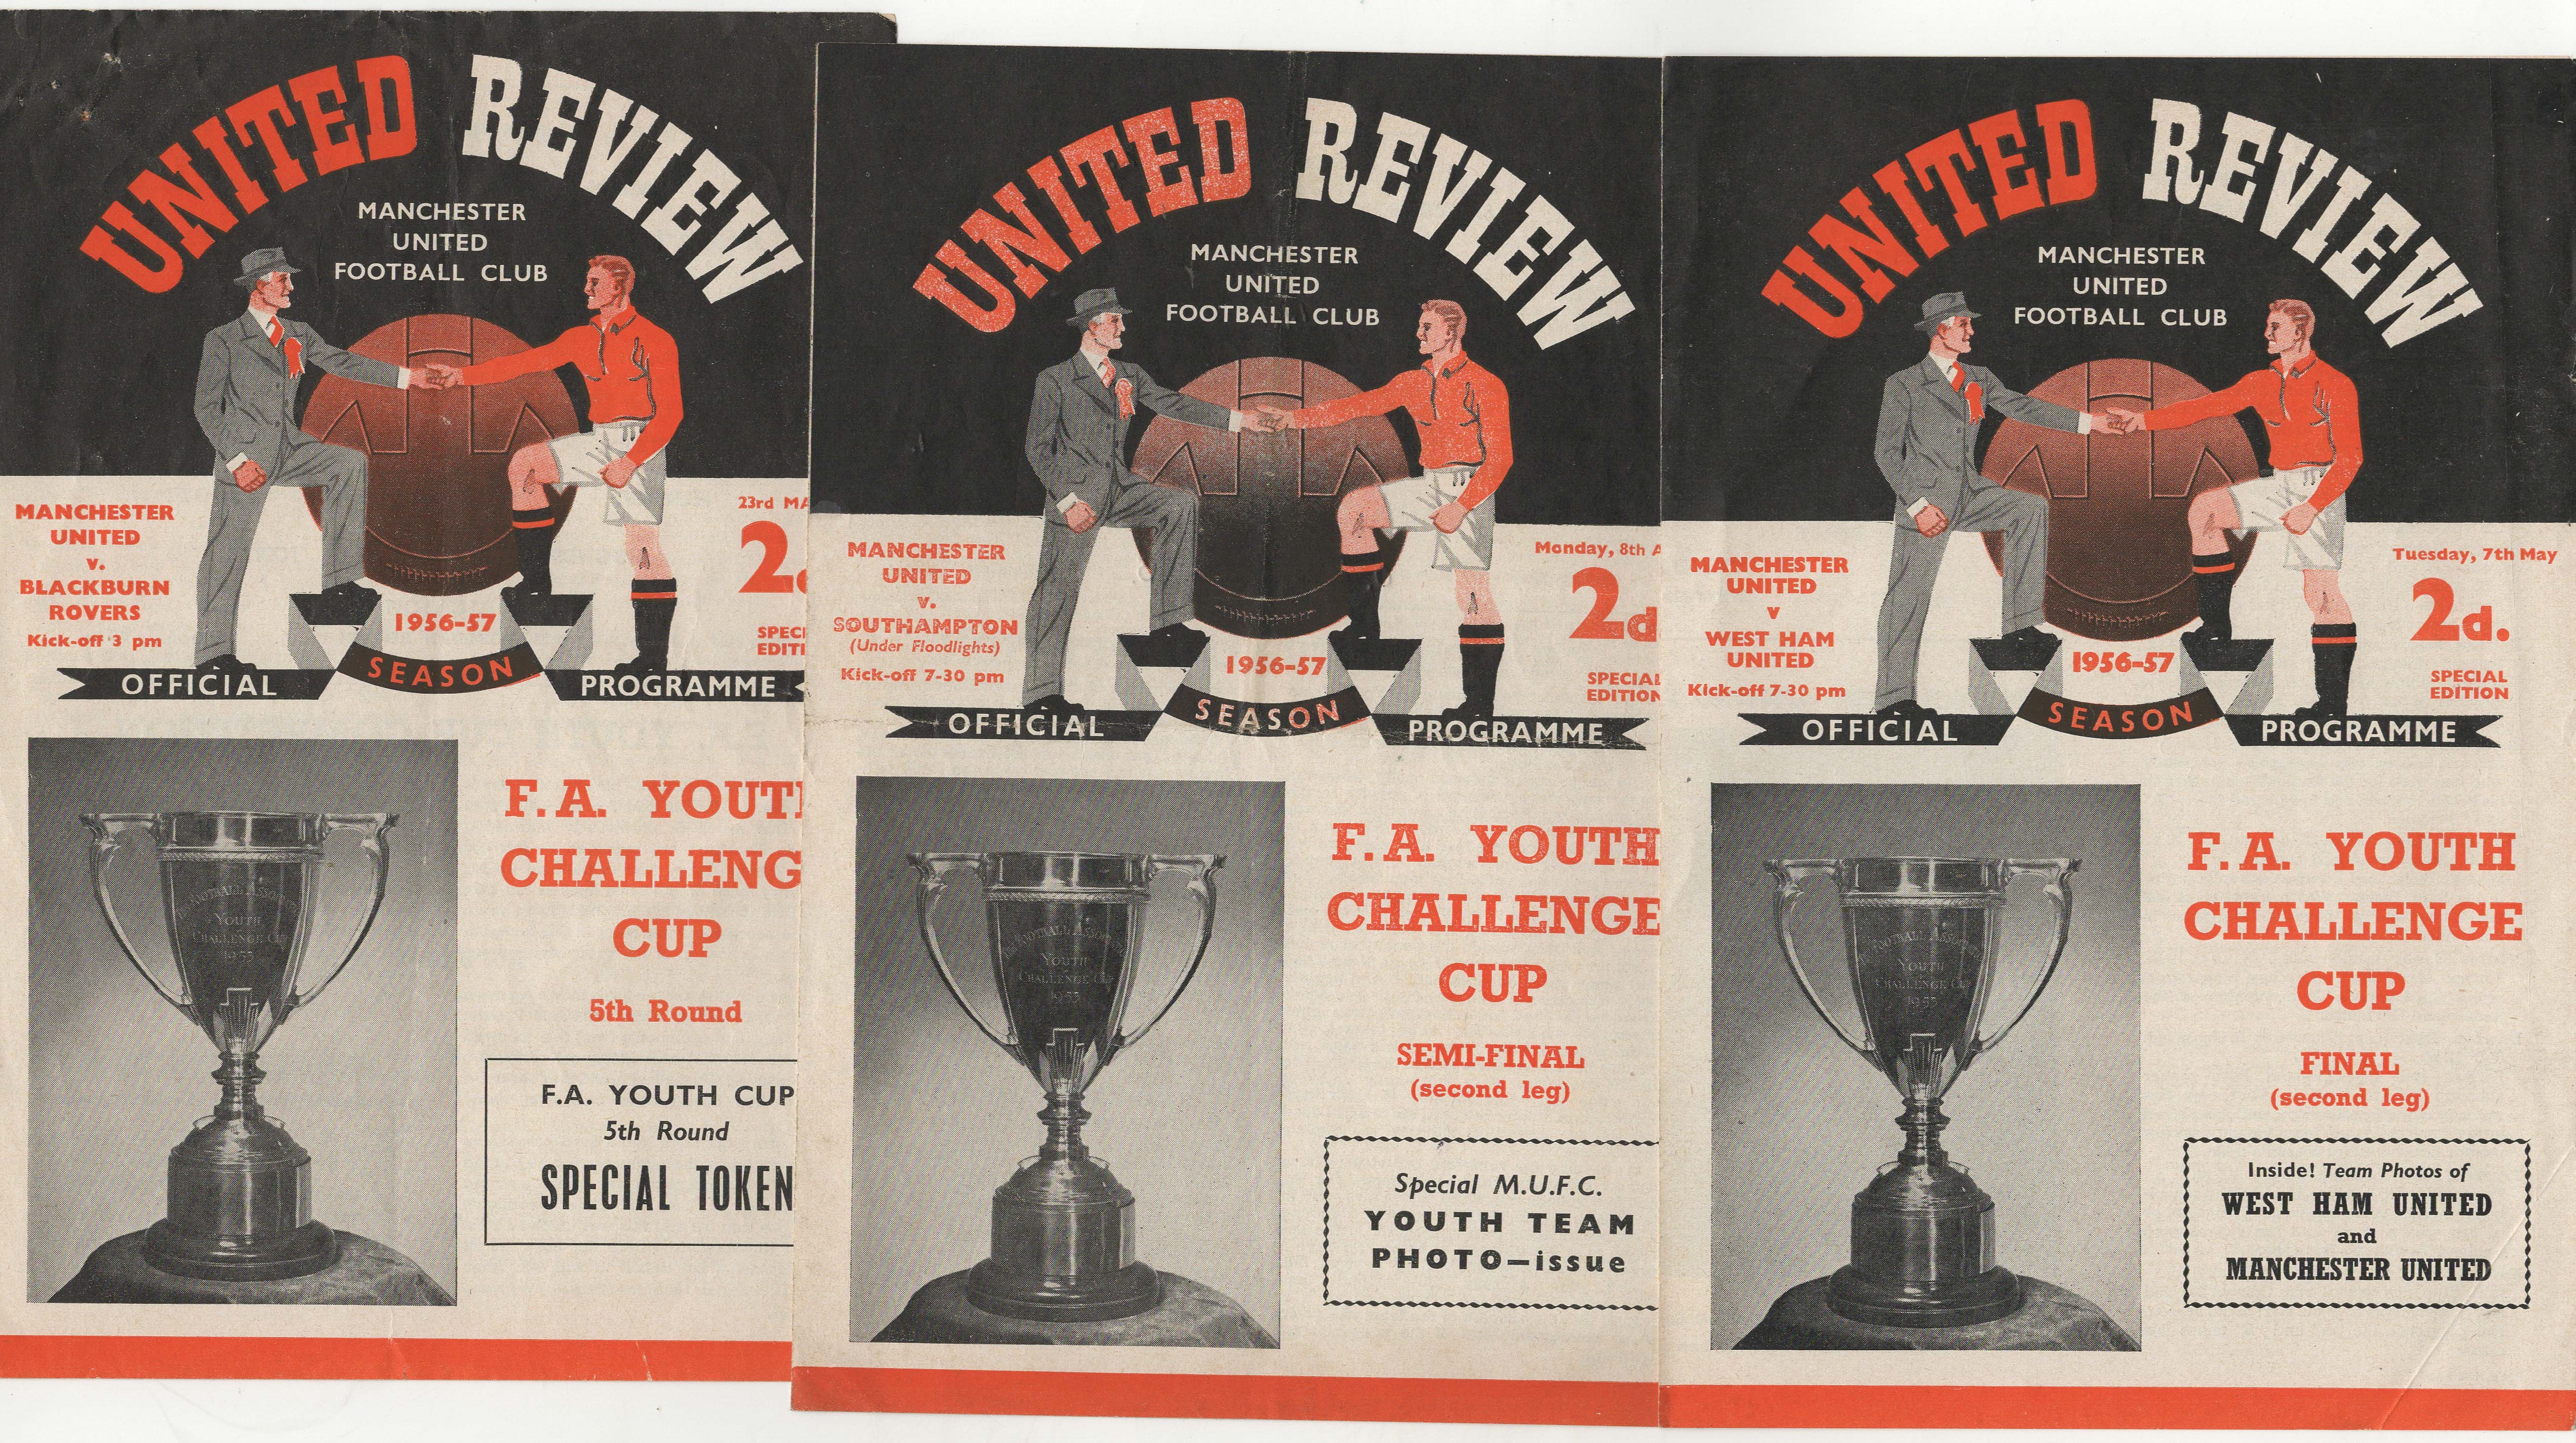 A collection of 3 Manchester United home programmes from the FA Youth Cup in season 1956/57 v